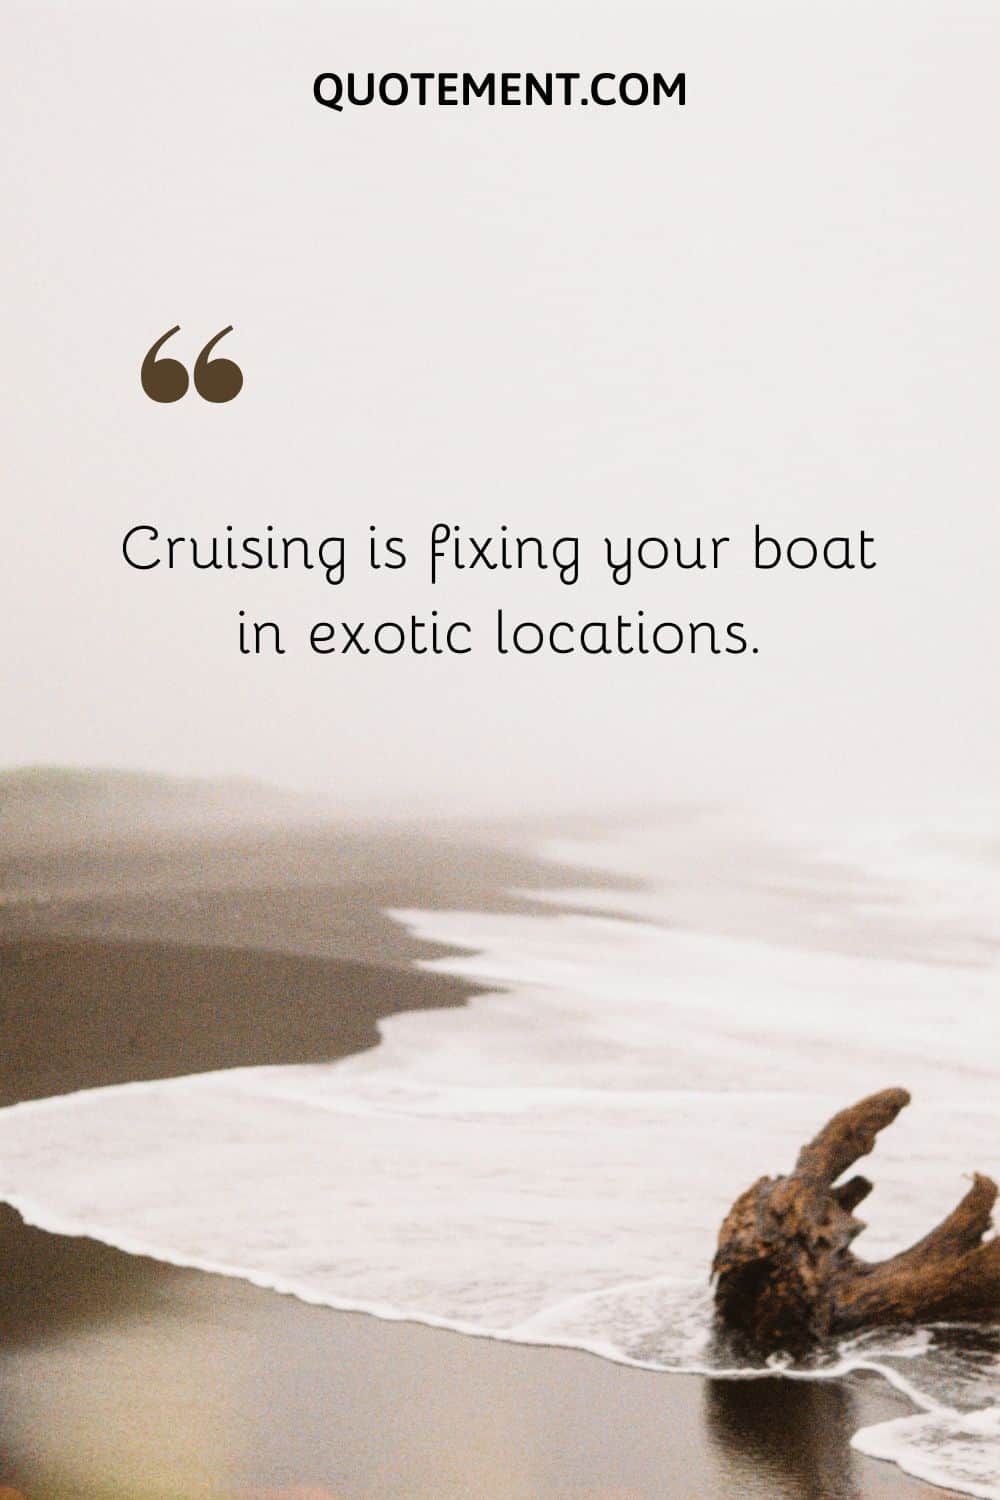 Cruising is fixing your boat in exotic locations.